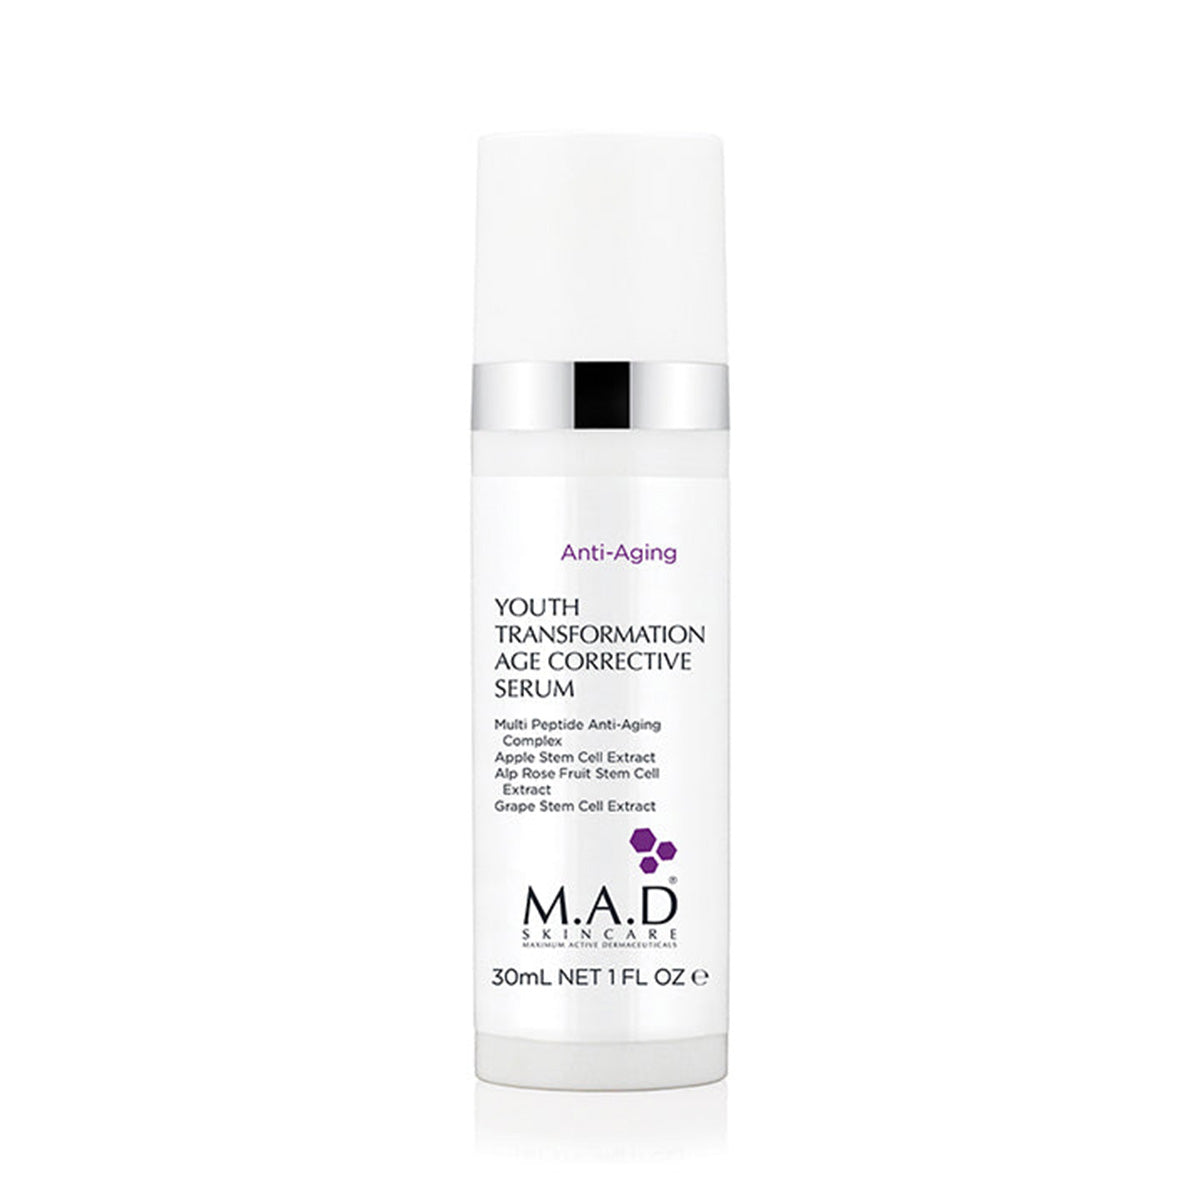 M.A.D Youth Transformation Age Corrective Serum